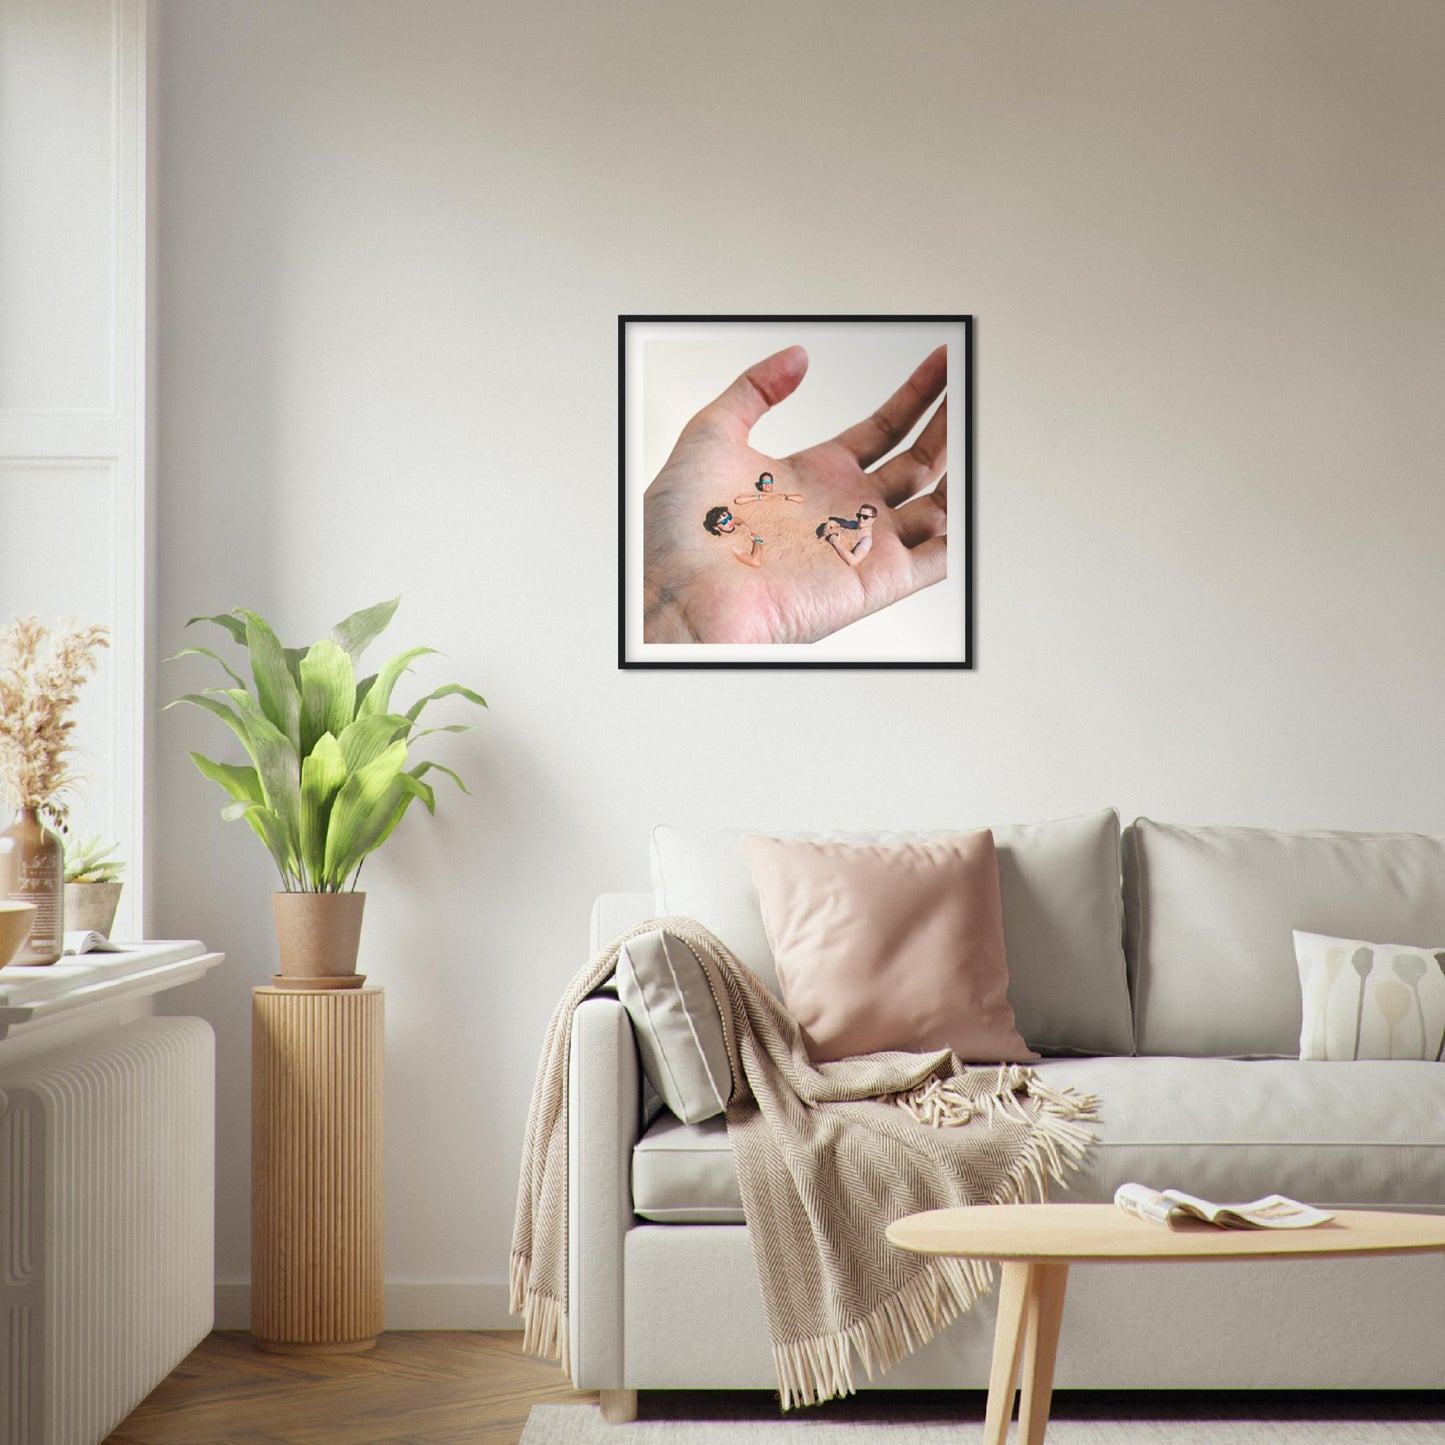 S(h)and - Museum-Quality Framed Art Print